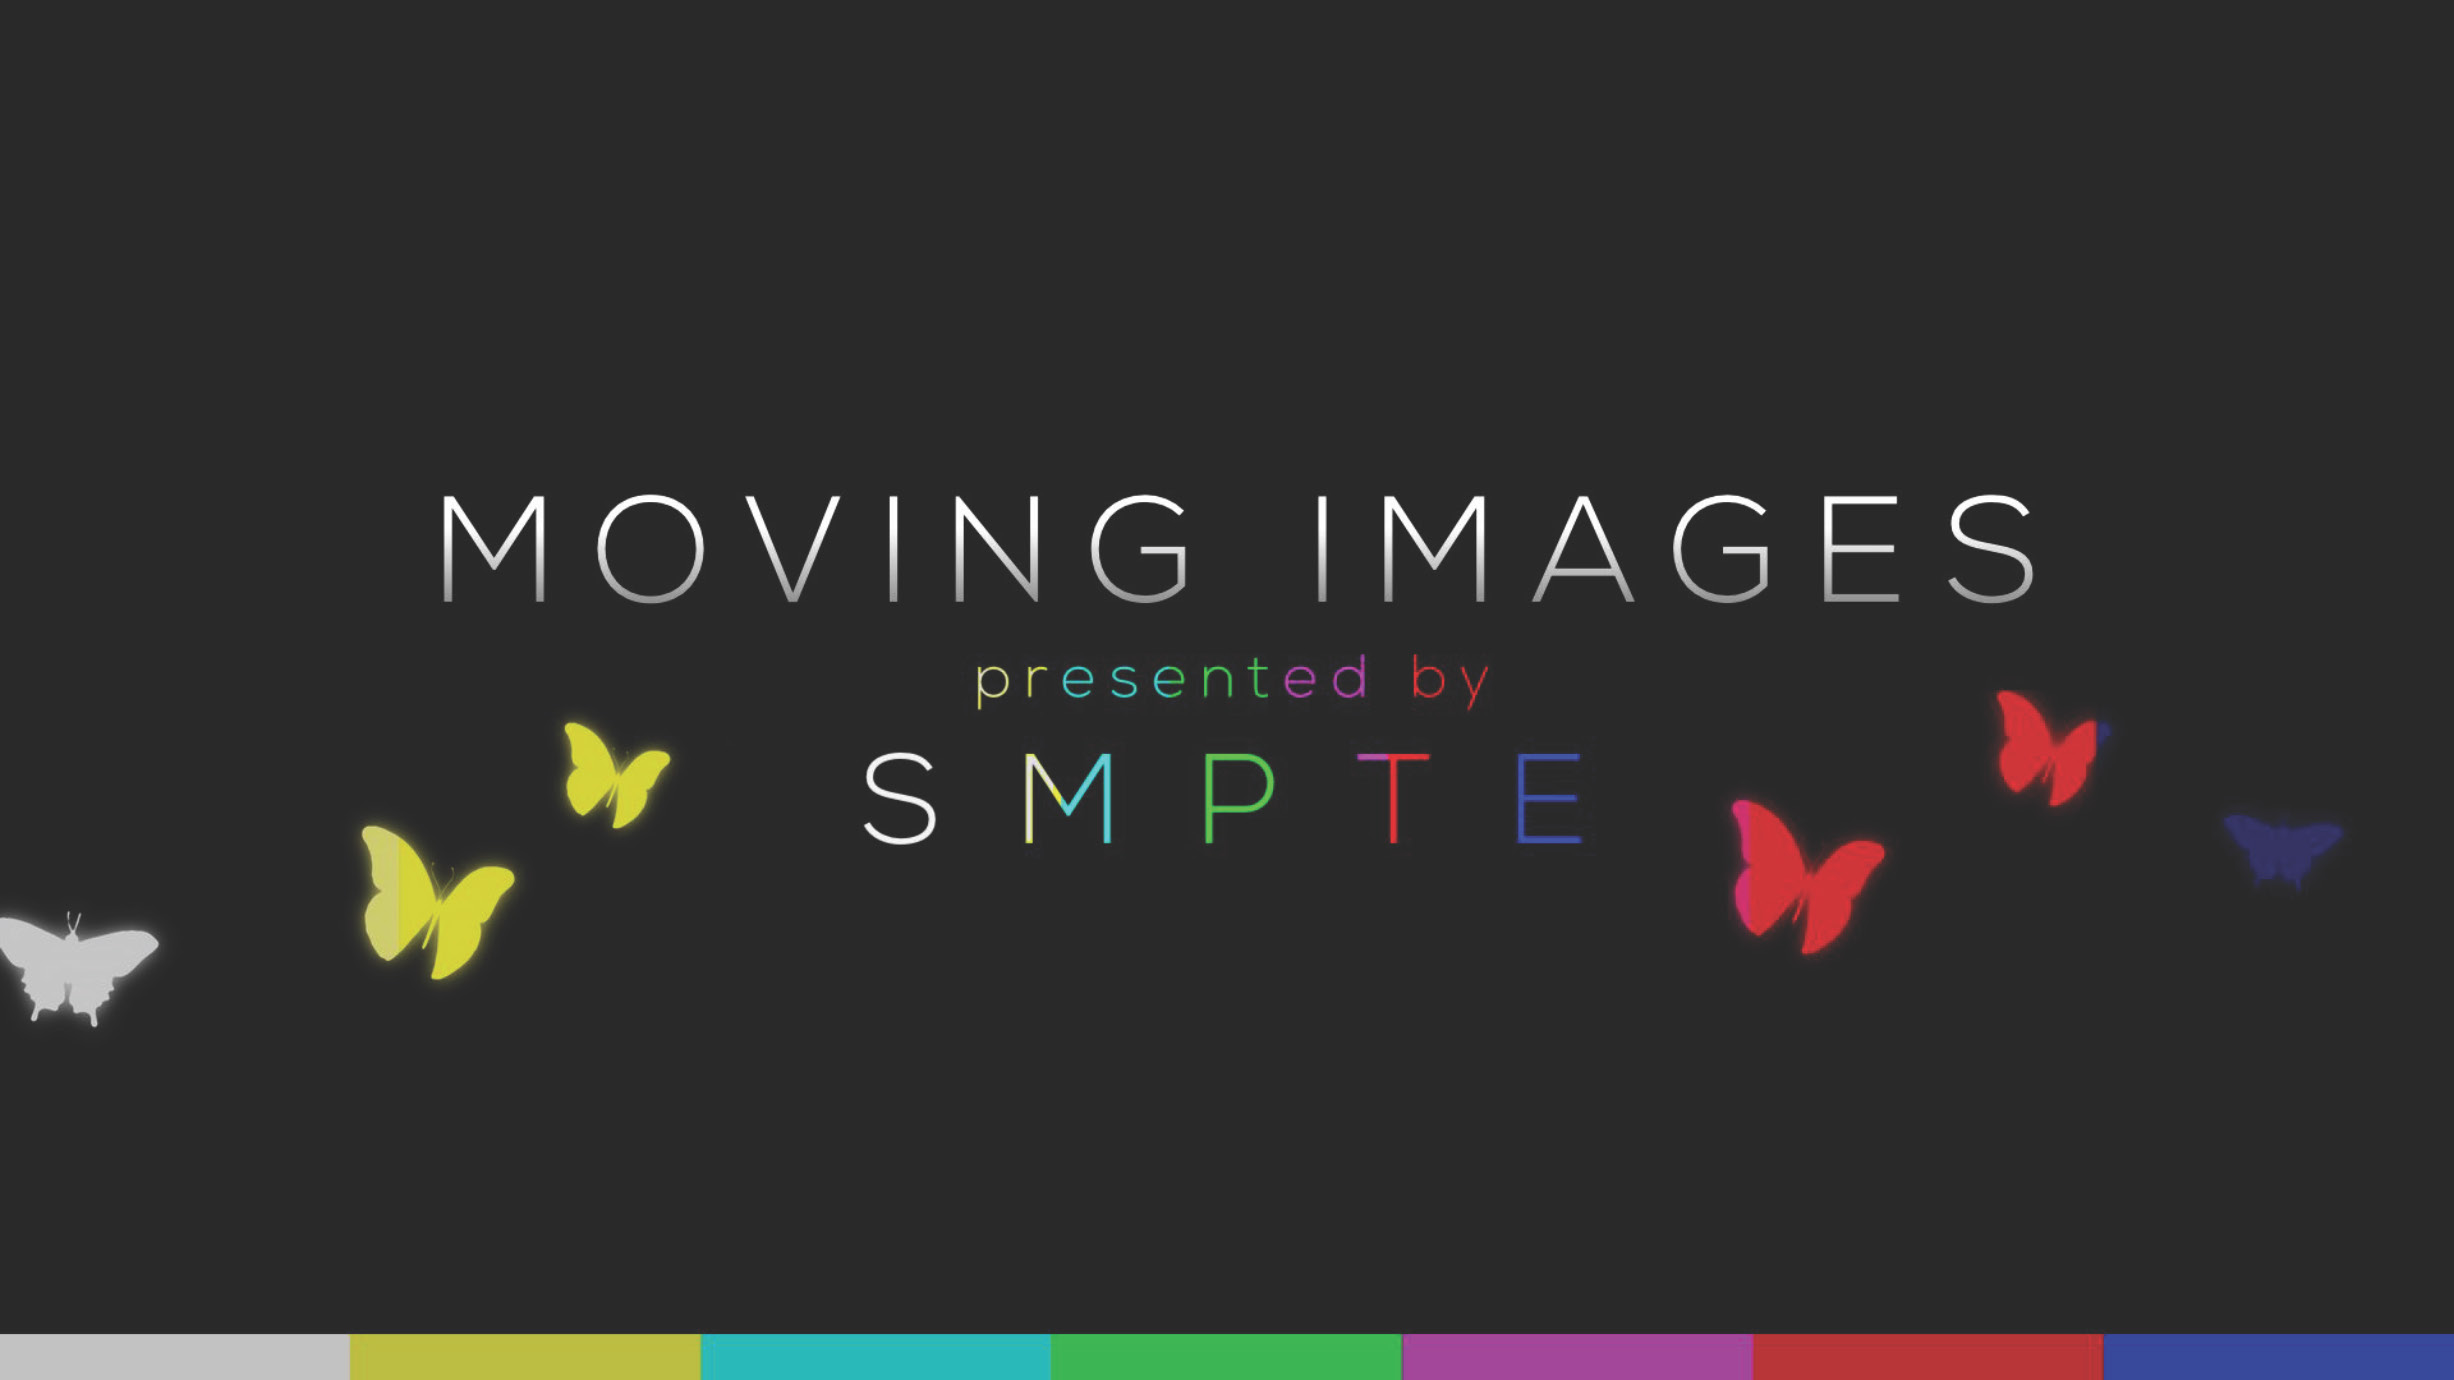 SMPTE to Produce Documentary on Evolution of Motion-Imaging Technology